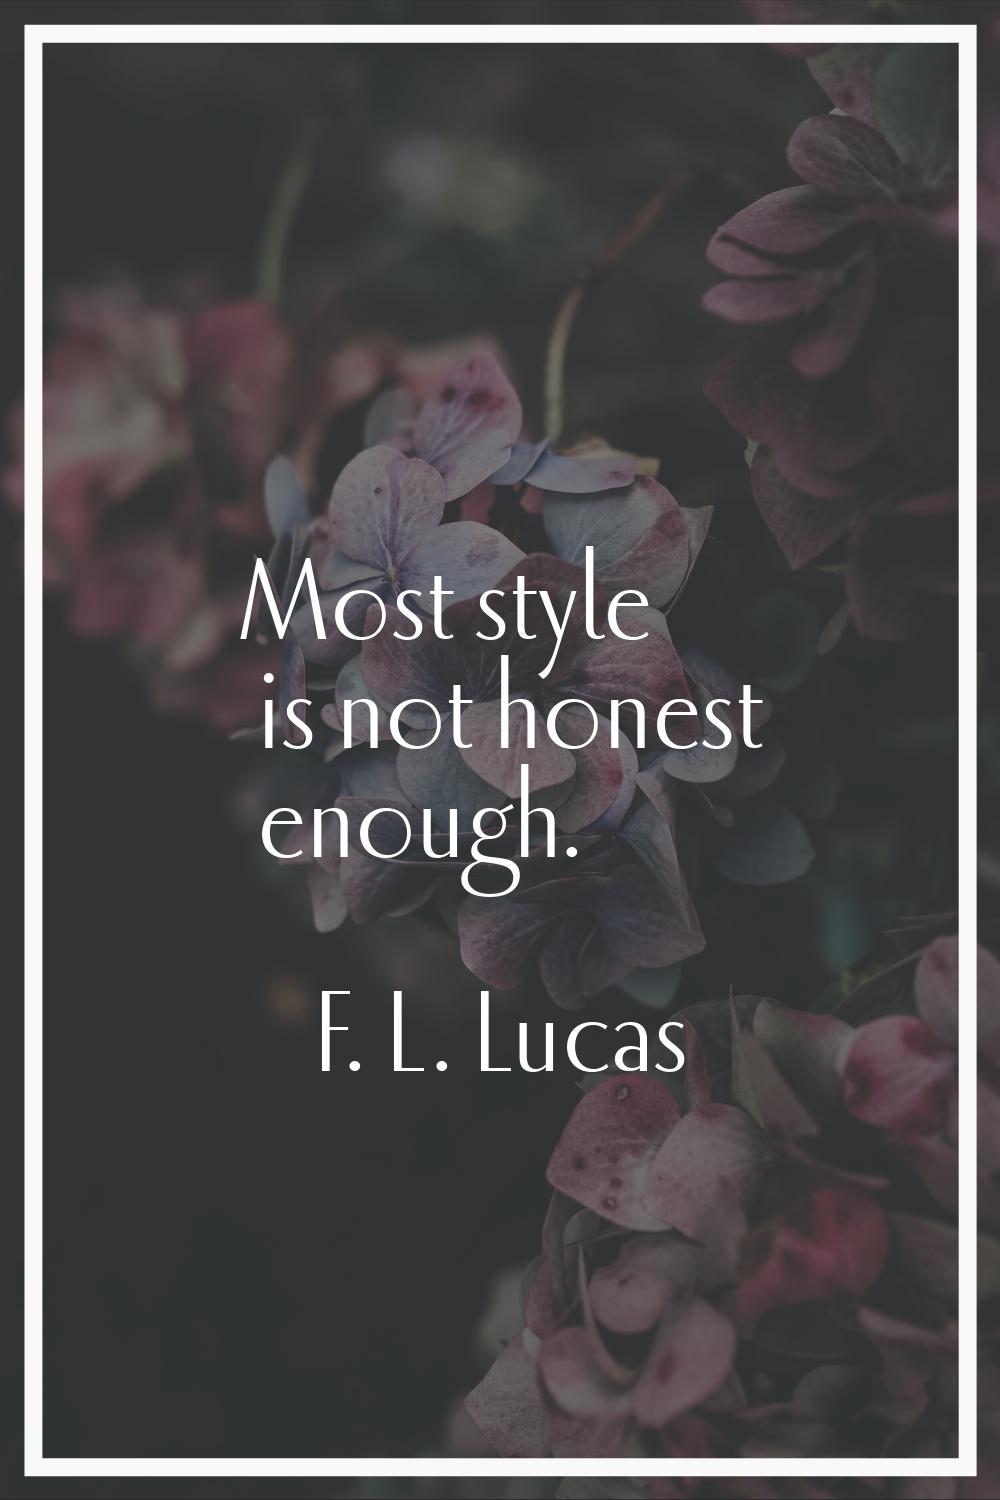 Most style is not honest enough.